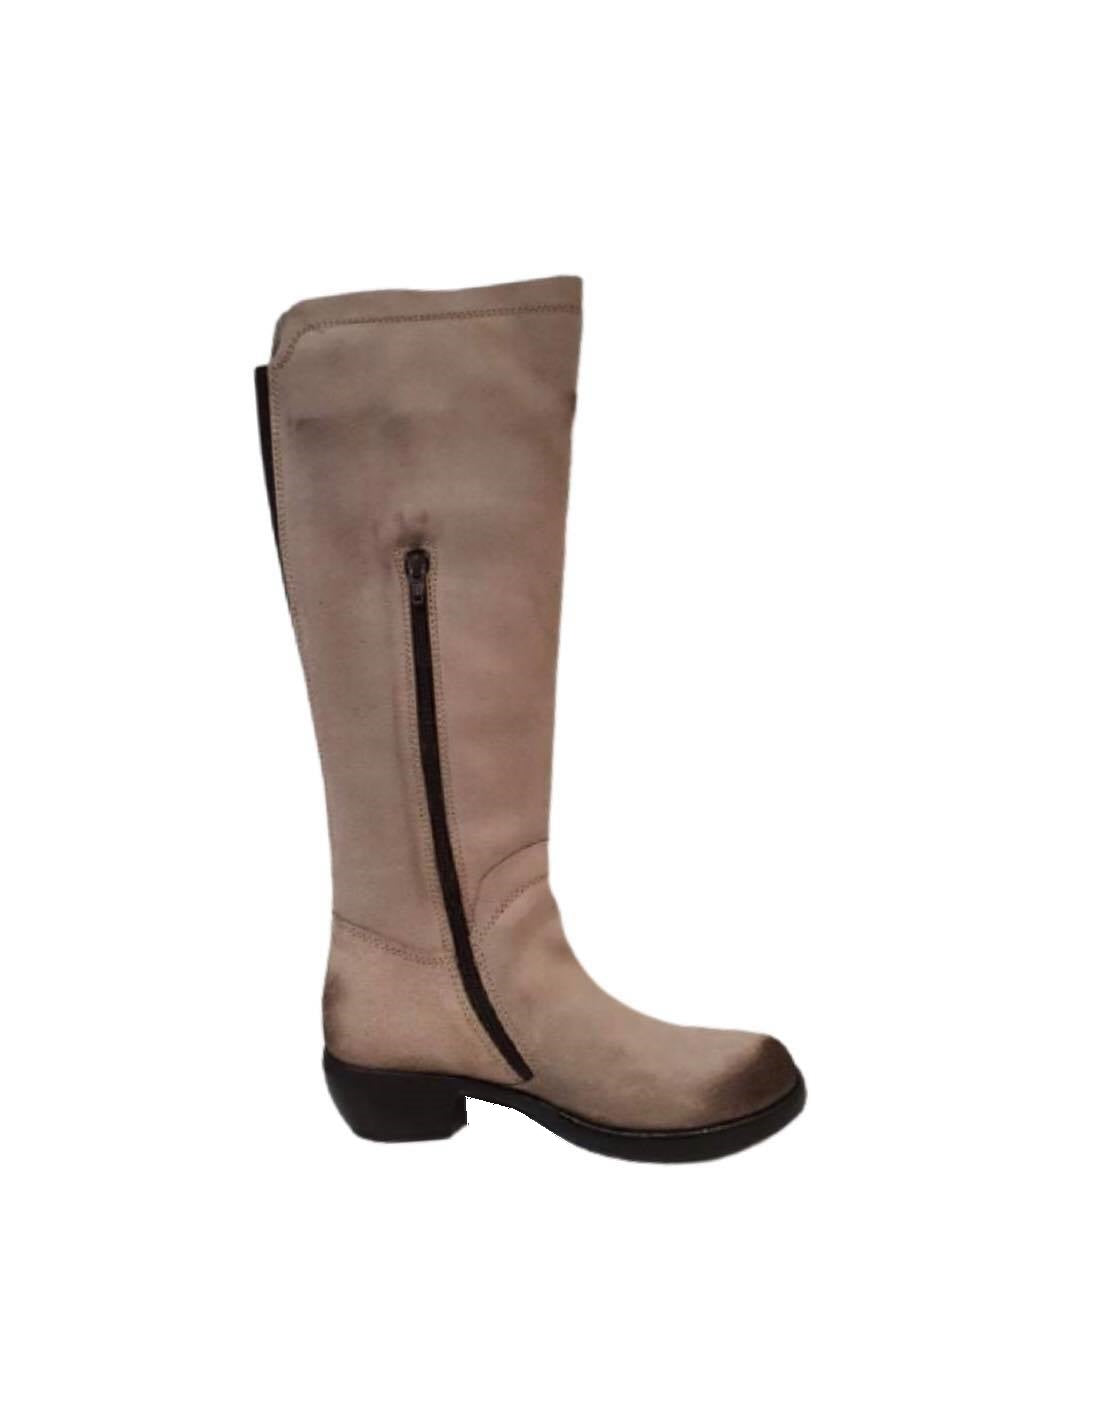 Fly London Mistry Taupe Zip Knee Hi Boots Made In Portugal